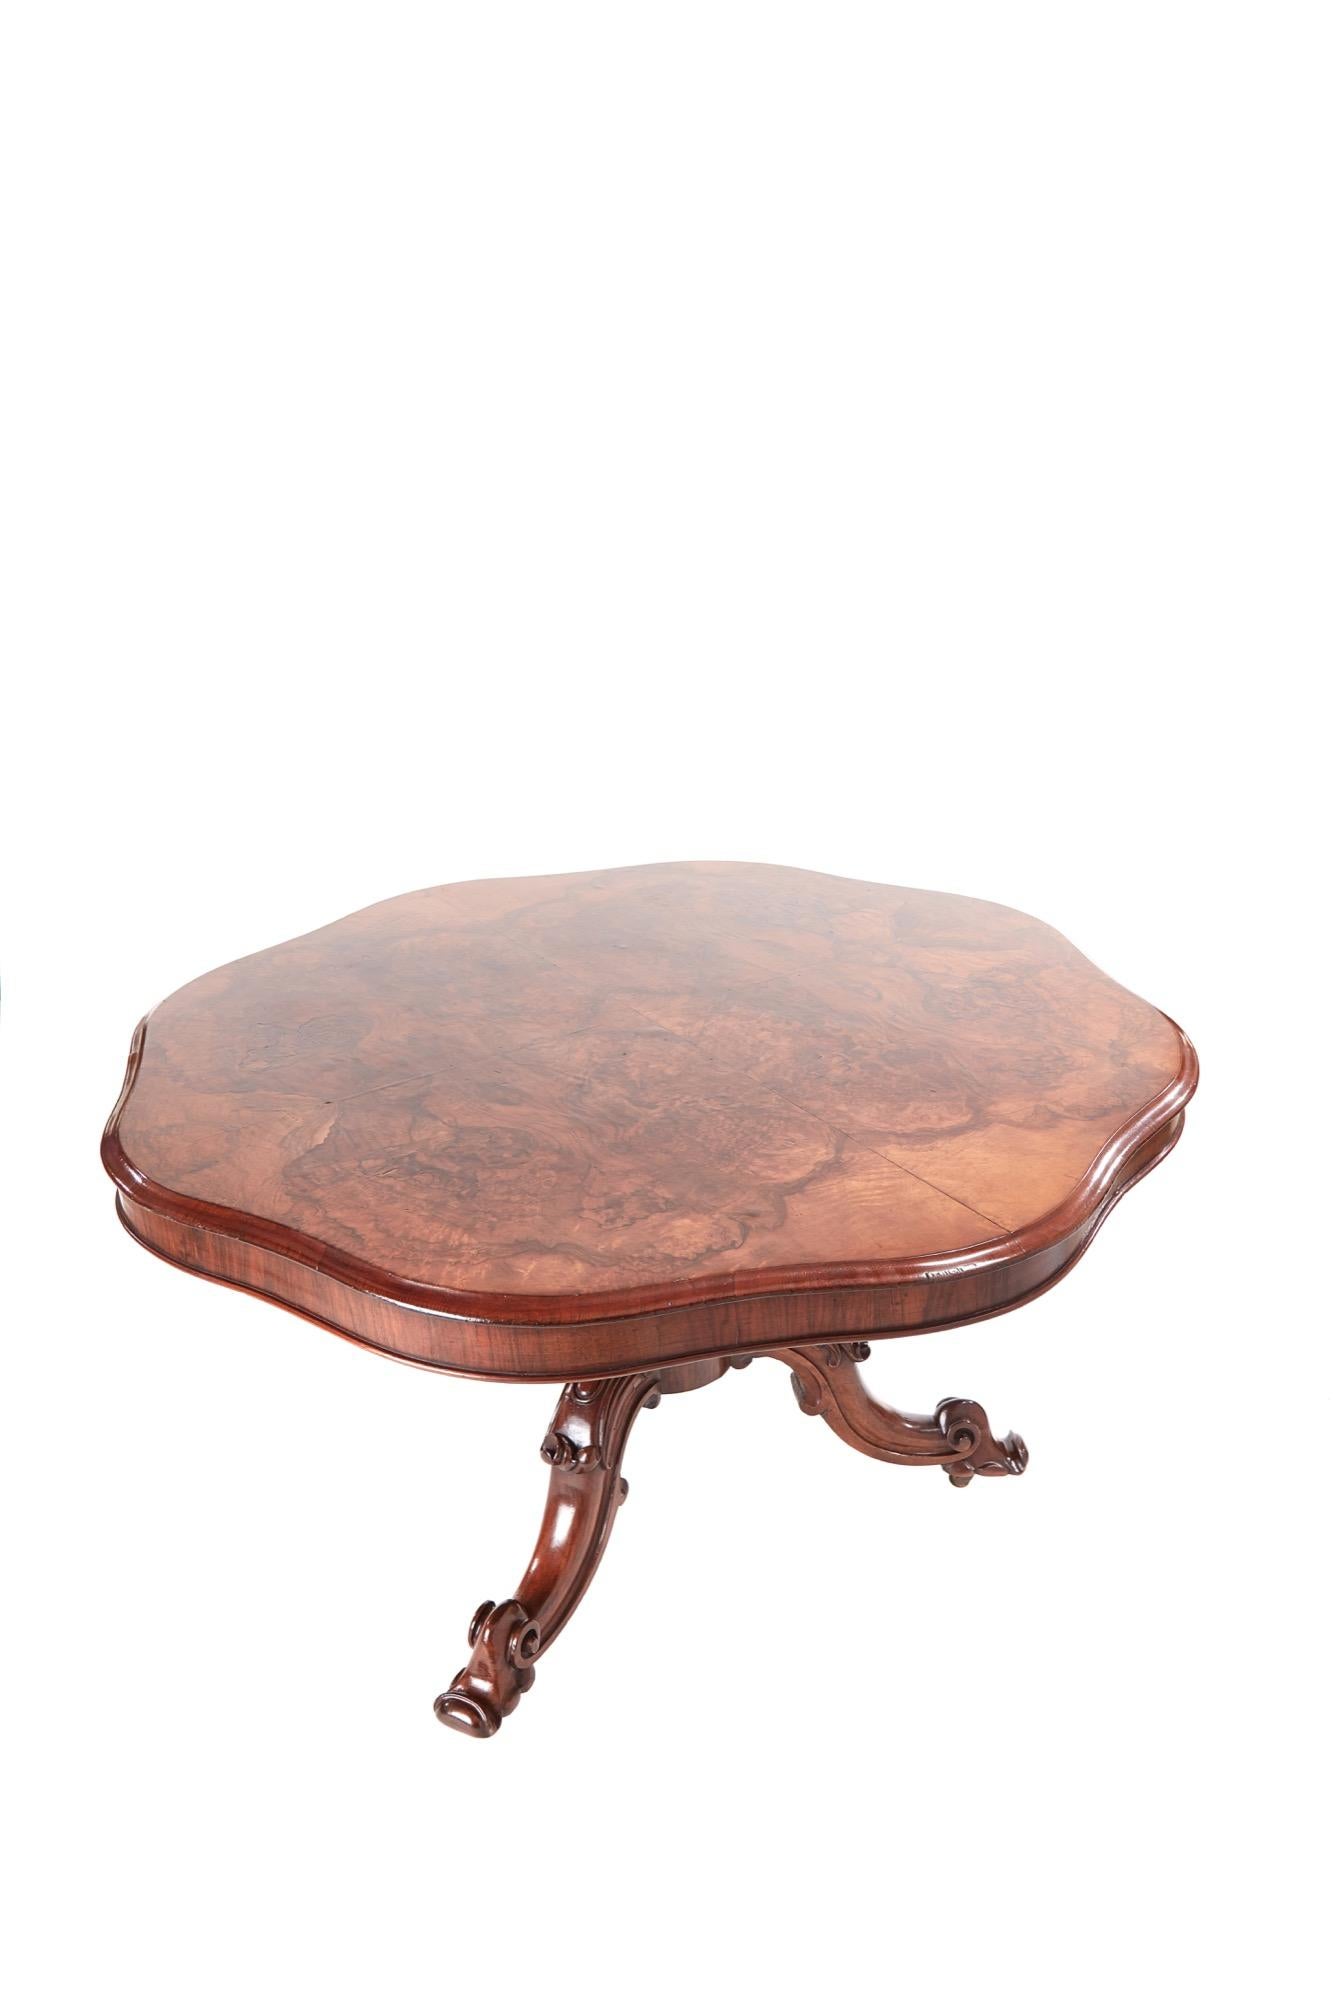 This is a fine quality burr walnut shaped centre table with a tilt-top having fantastic matched burr walnut veneers. It has a thumb moulded edge and a solid walnut base with a shaped reeded centre column. It is supported by three shaped carved